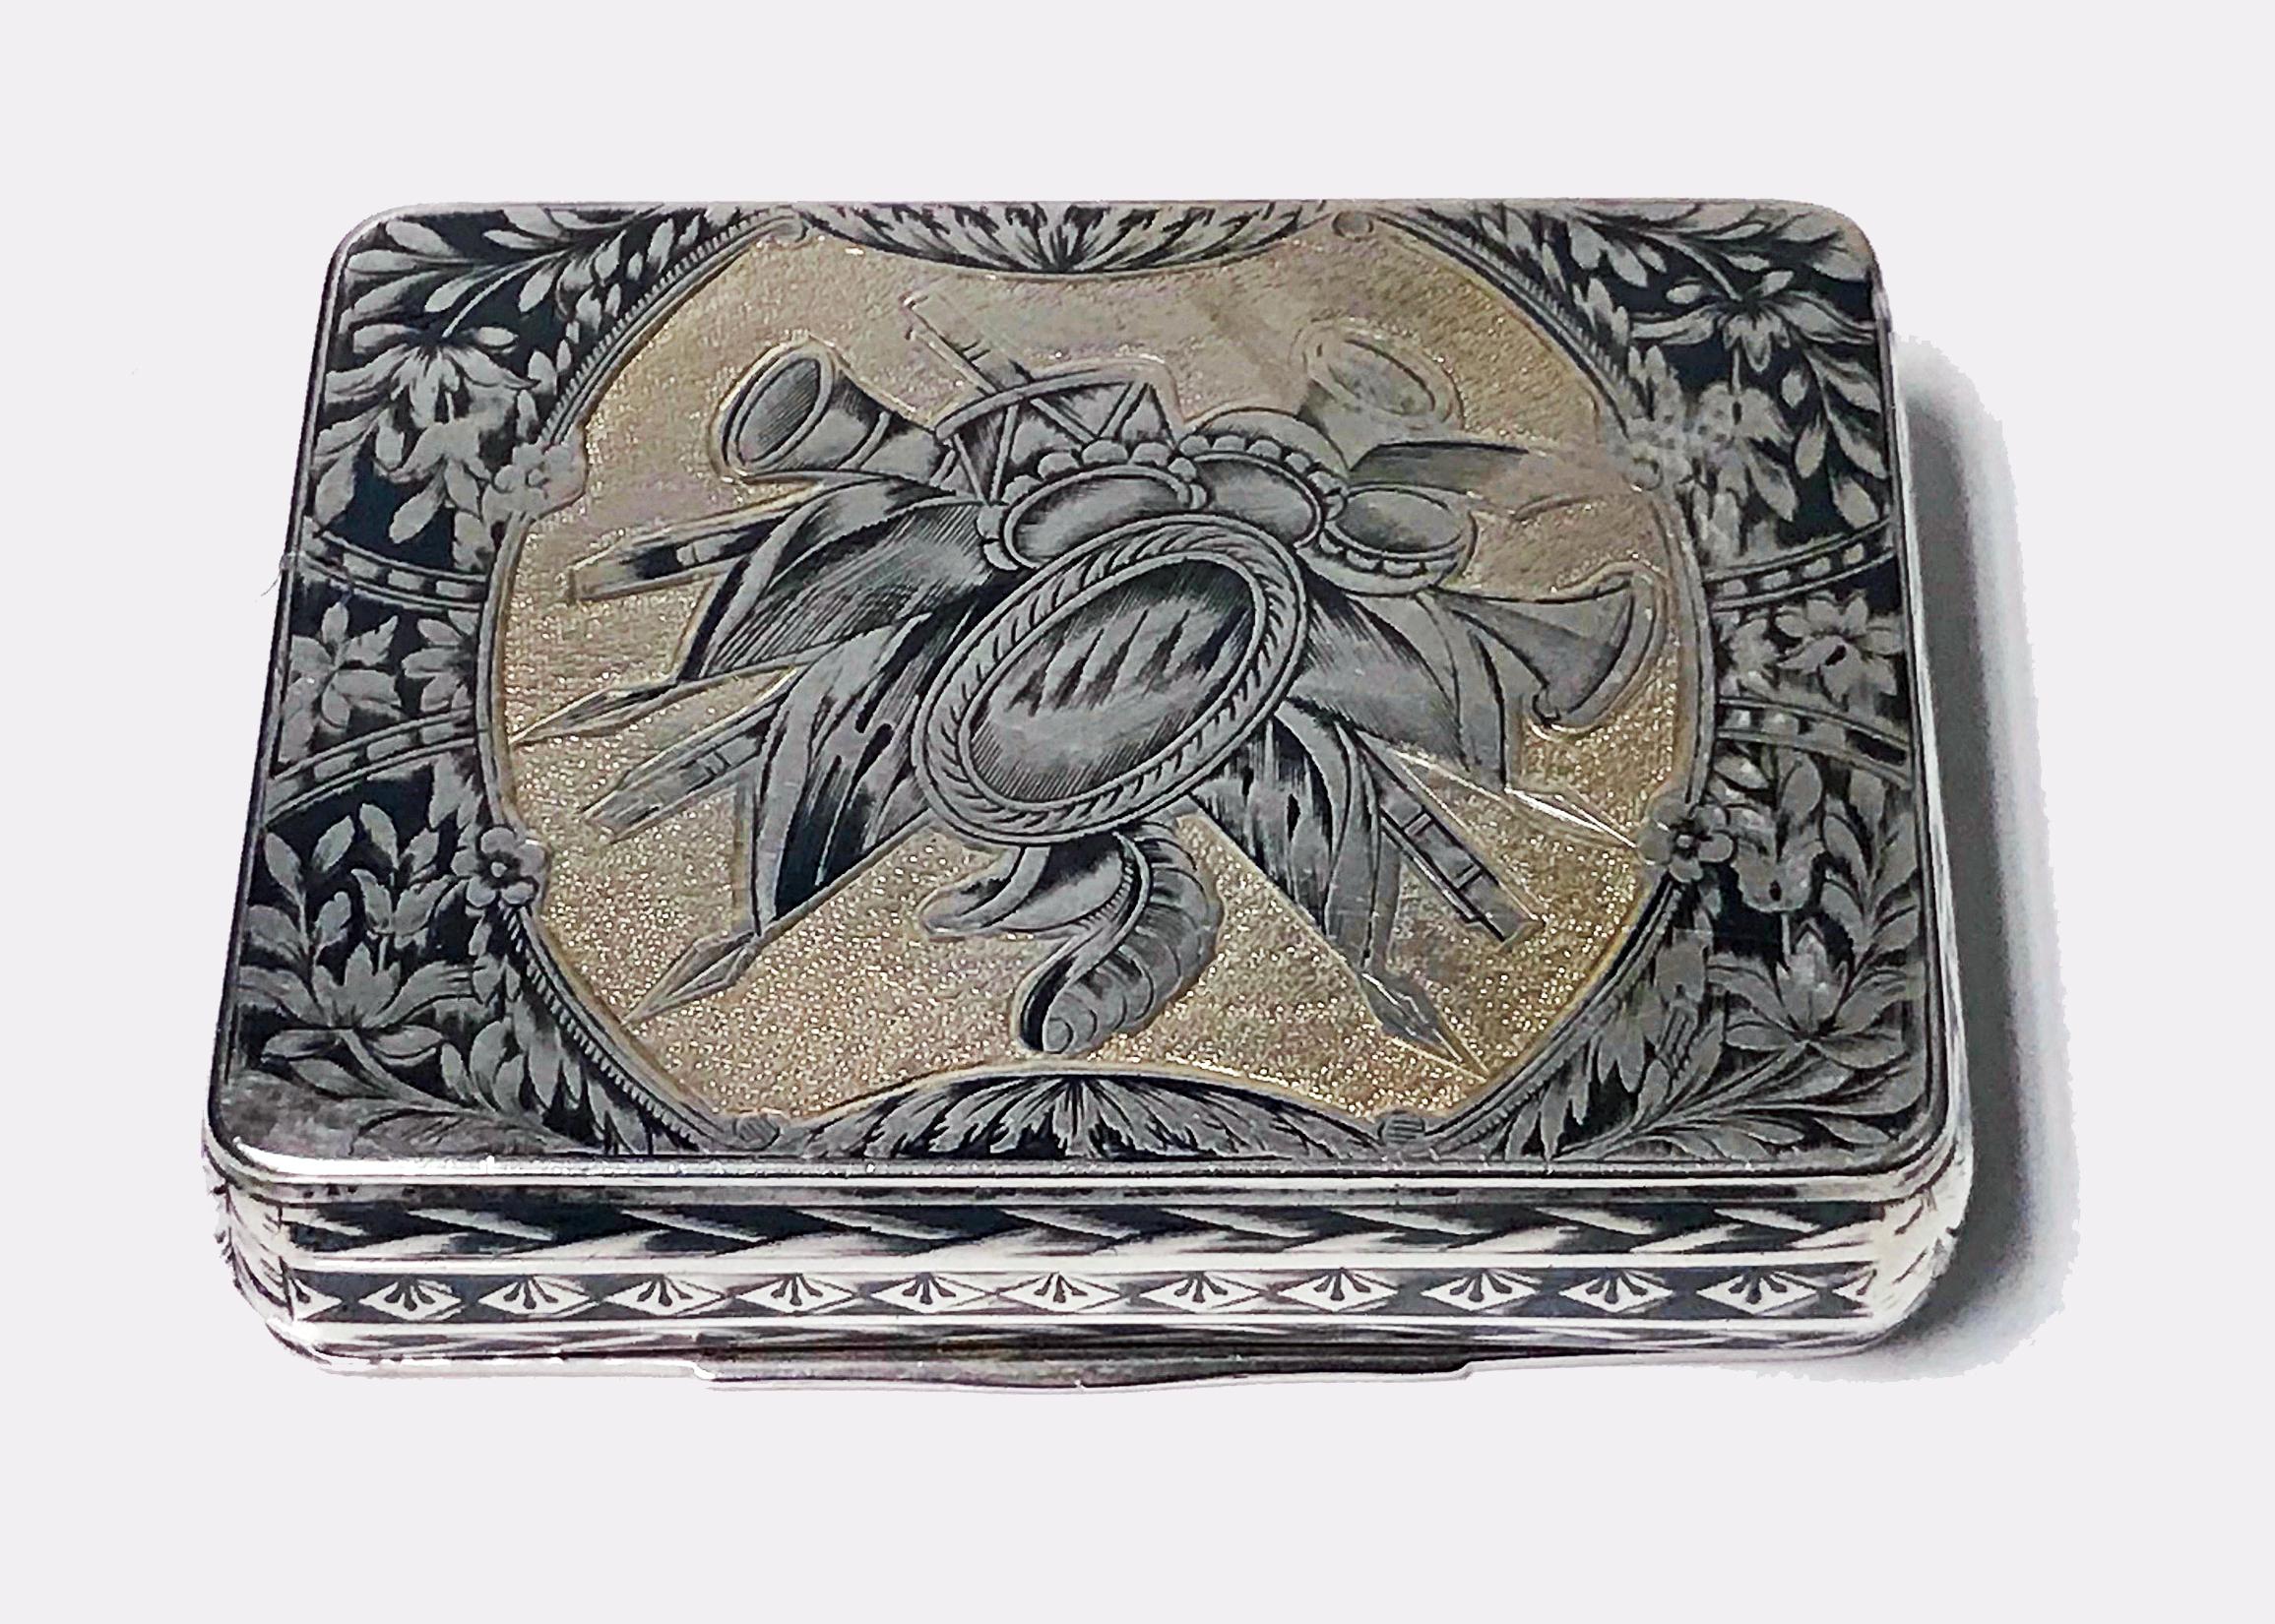 Fine Russian Silver Niello Snuff Box, assayer Nikolaì Lukich Dubrovin 1824. The hinged cover decorated with the Bronze Horseman, Peter The Great on rock against stippled scale work background with foliate surround and inscribed with Cyrillic Peter 1